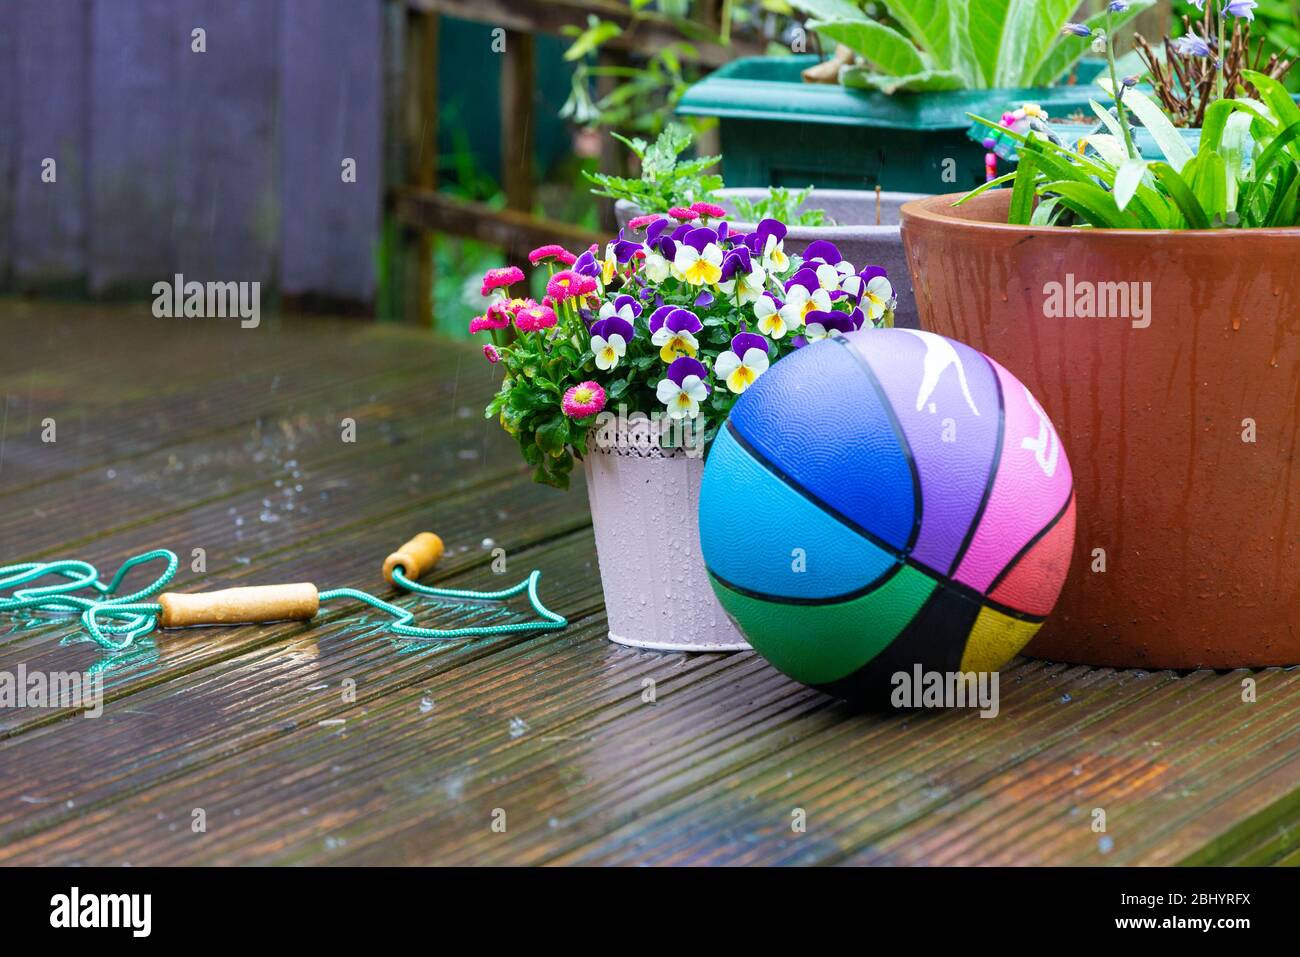 Ashford, Kent, UK. 28th Apr, 2020. UK Weather: After a long spell of sunny weather rain hits the UK in most regions of the country. Hamstreet village life in the coronavirus lockdown. ©Paul Lawrenson 2020, Photo Credit: Paul Lawrenson/ Alamy Live News Stock Photo